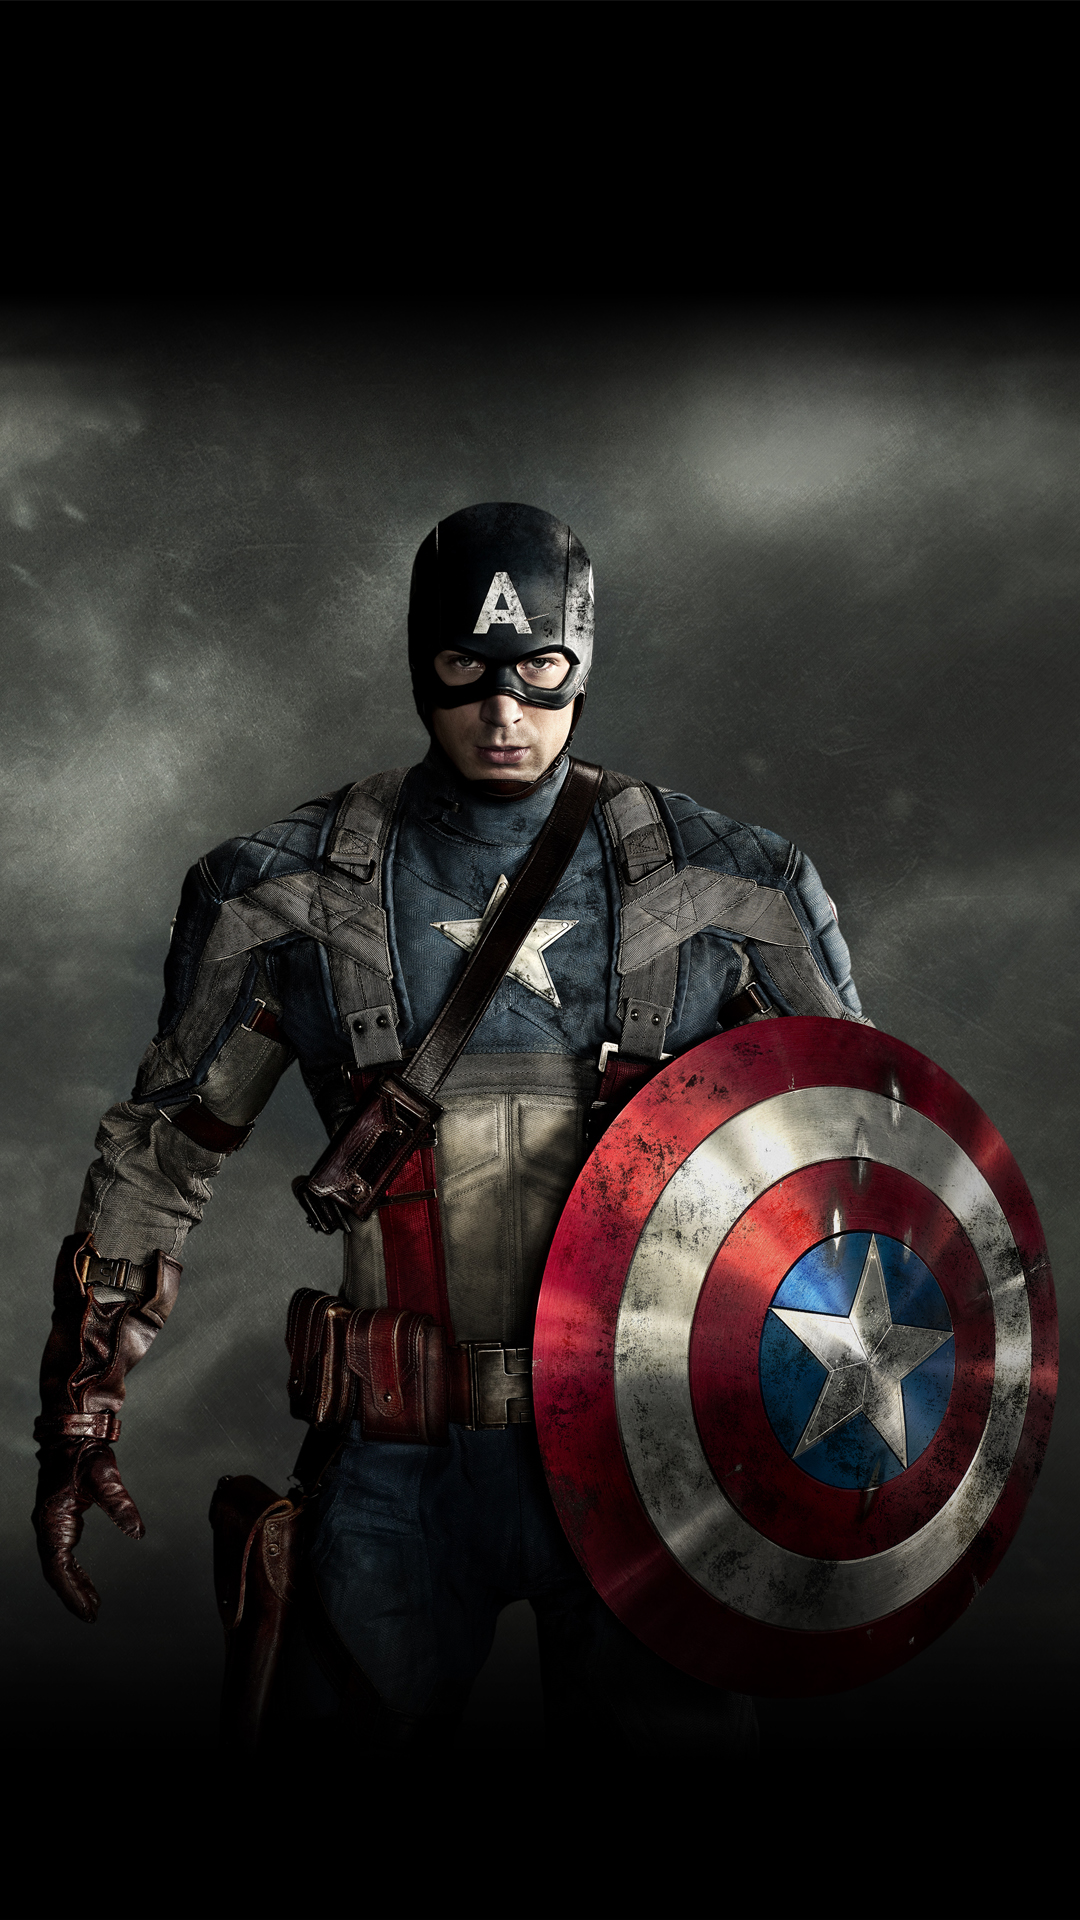 The Avengers Captain America - Captain America Wallpaper Hd For Android , HD Wallpaper & Backgrounds